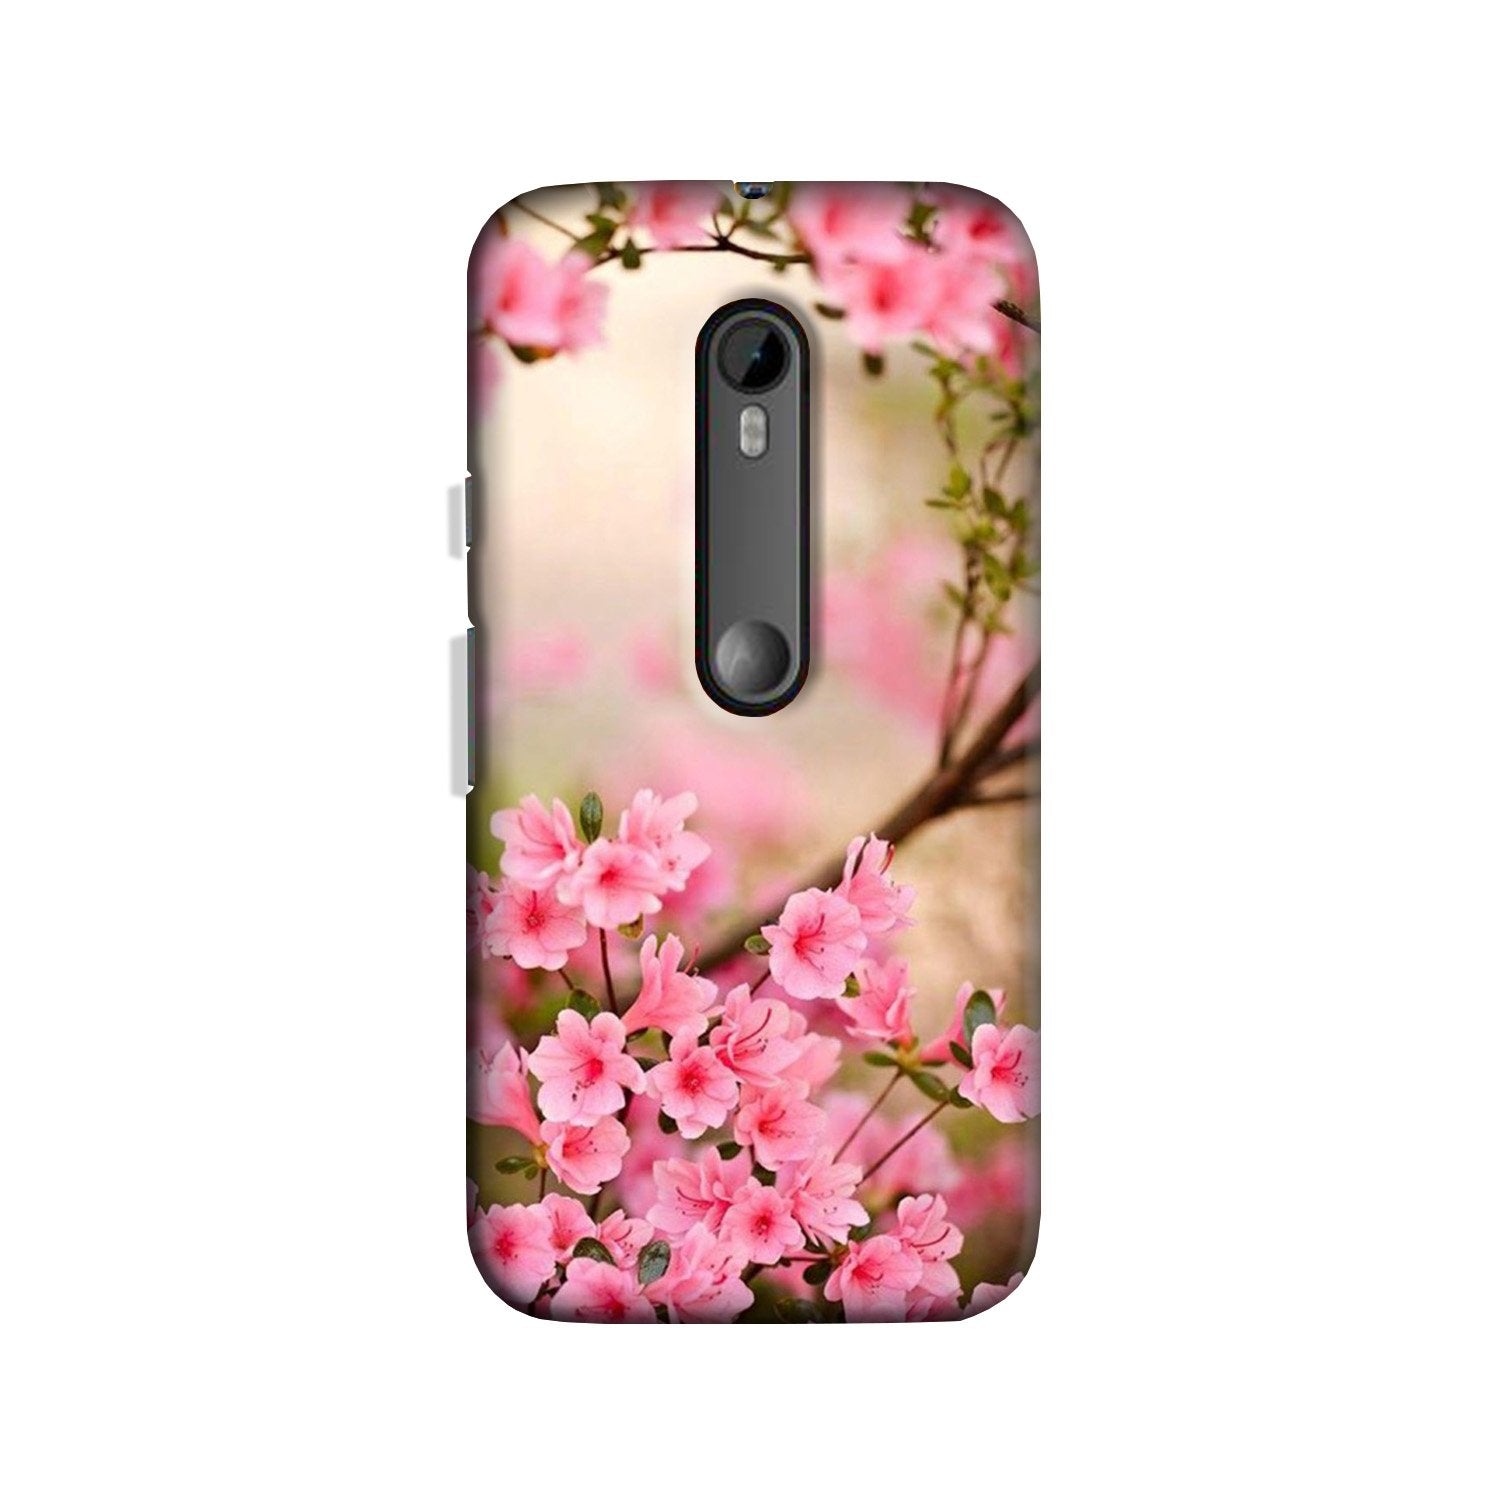 Pink flowers Case for Moto X Force